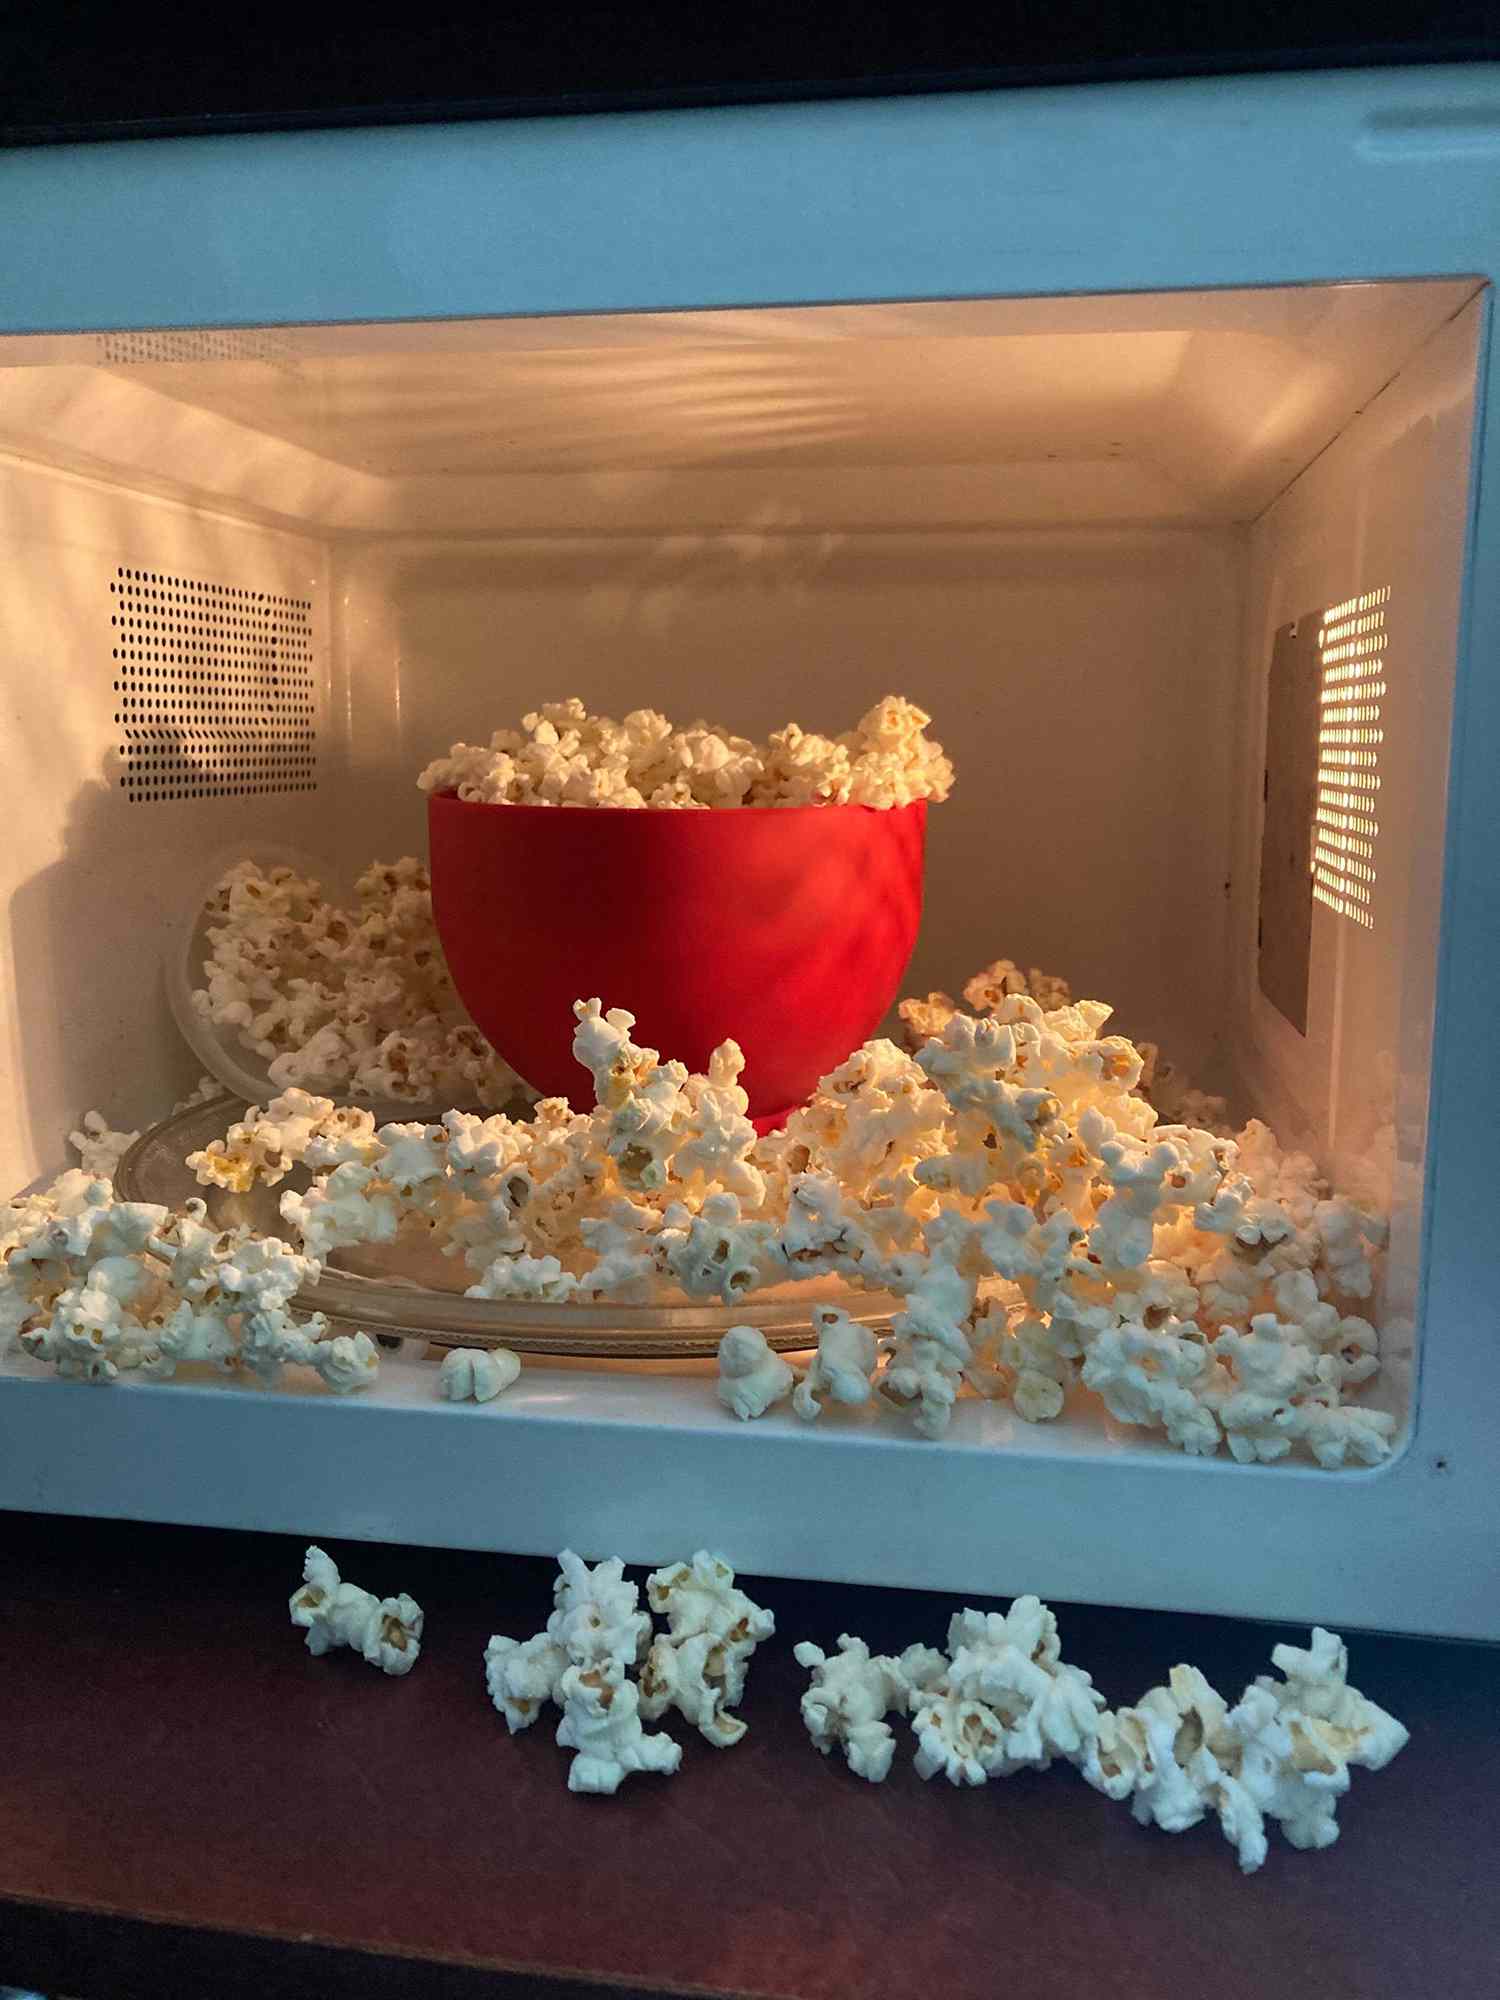 Popcorn that over popped in a microwave